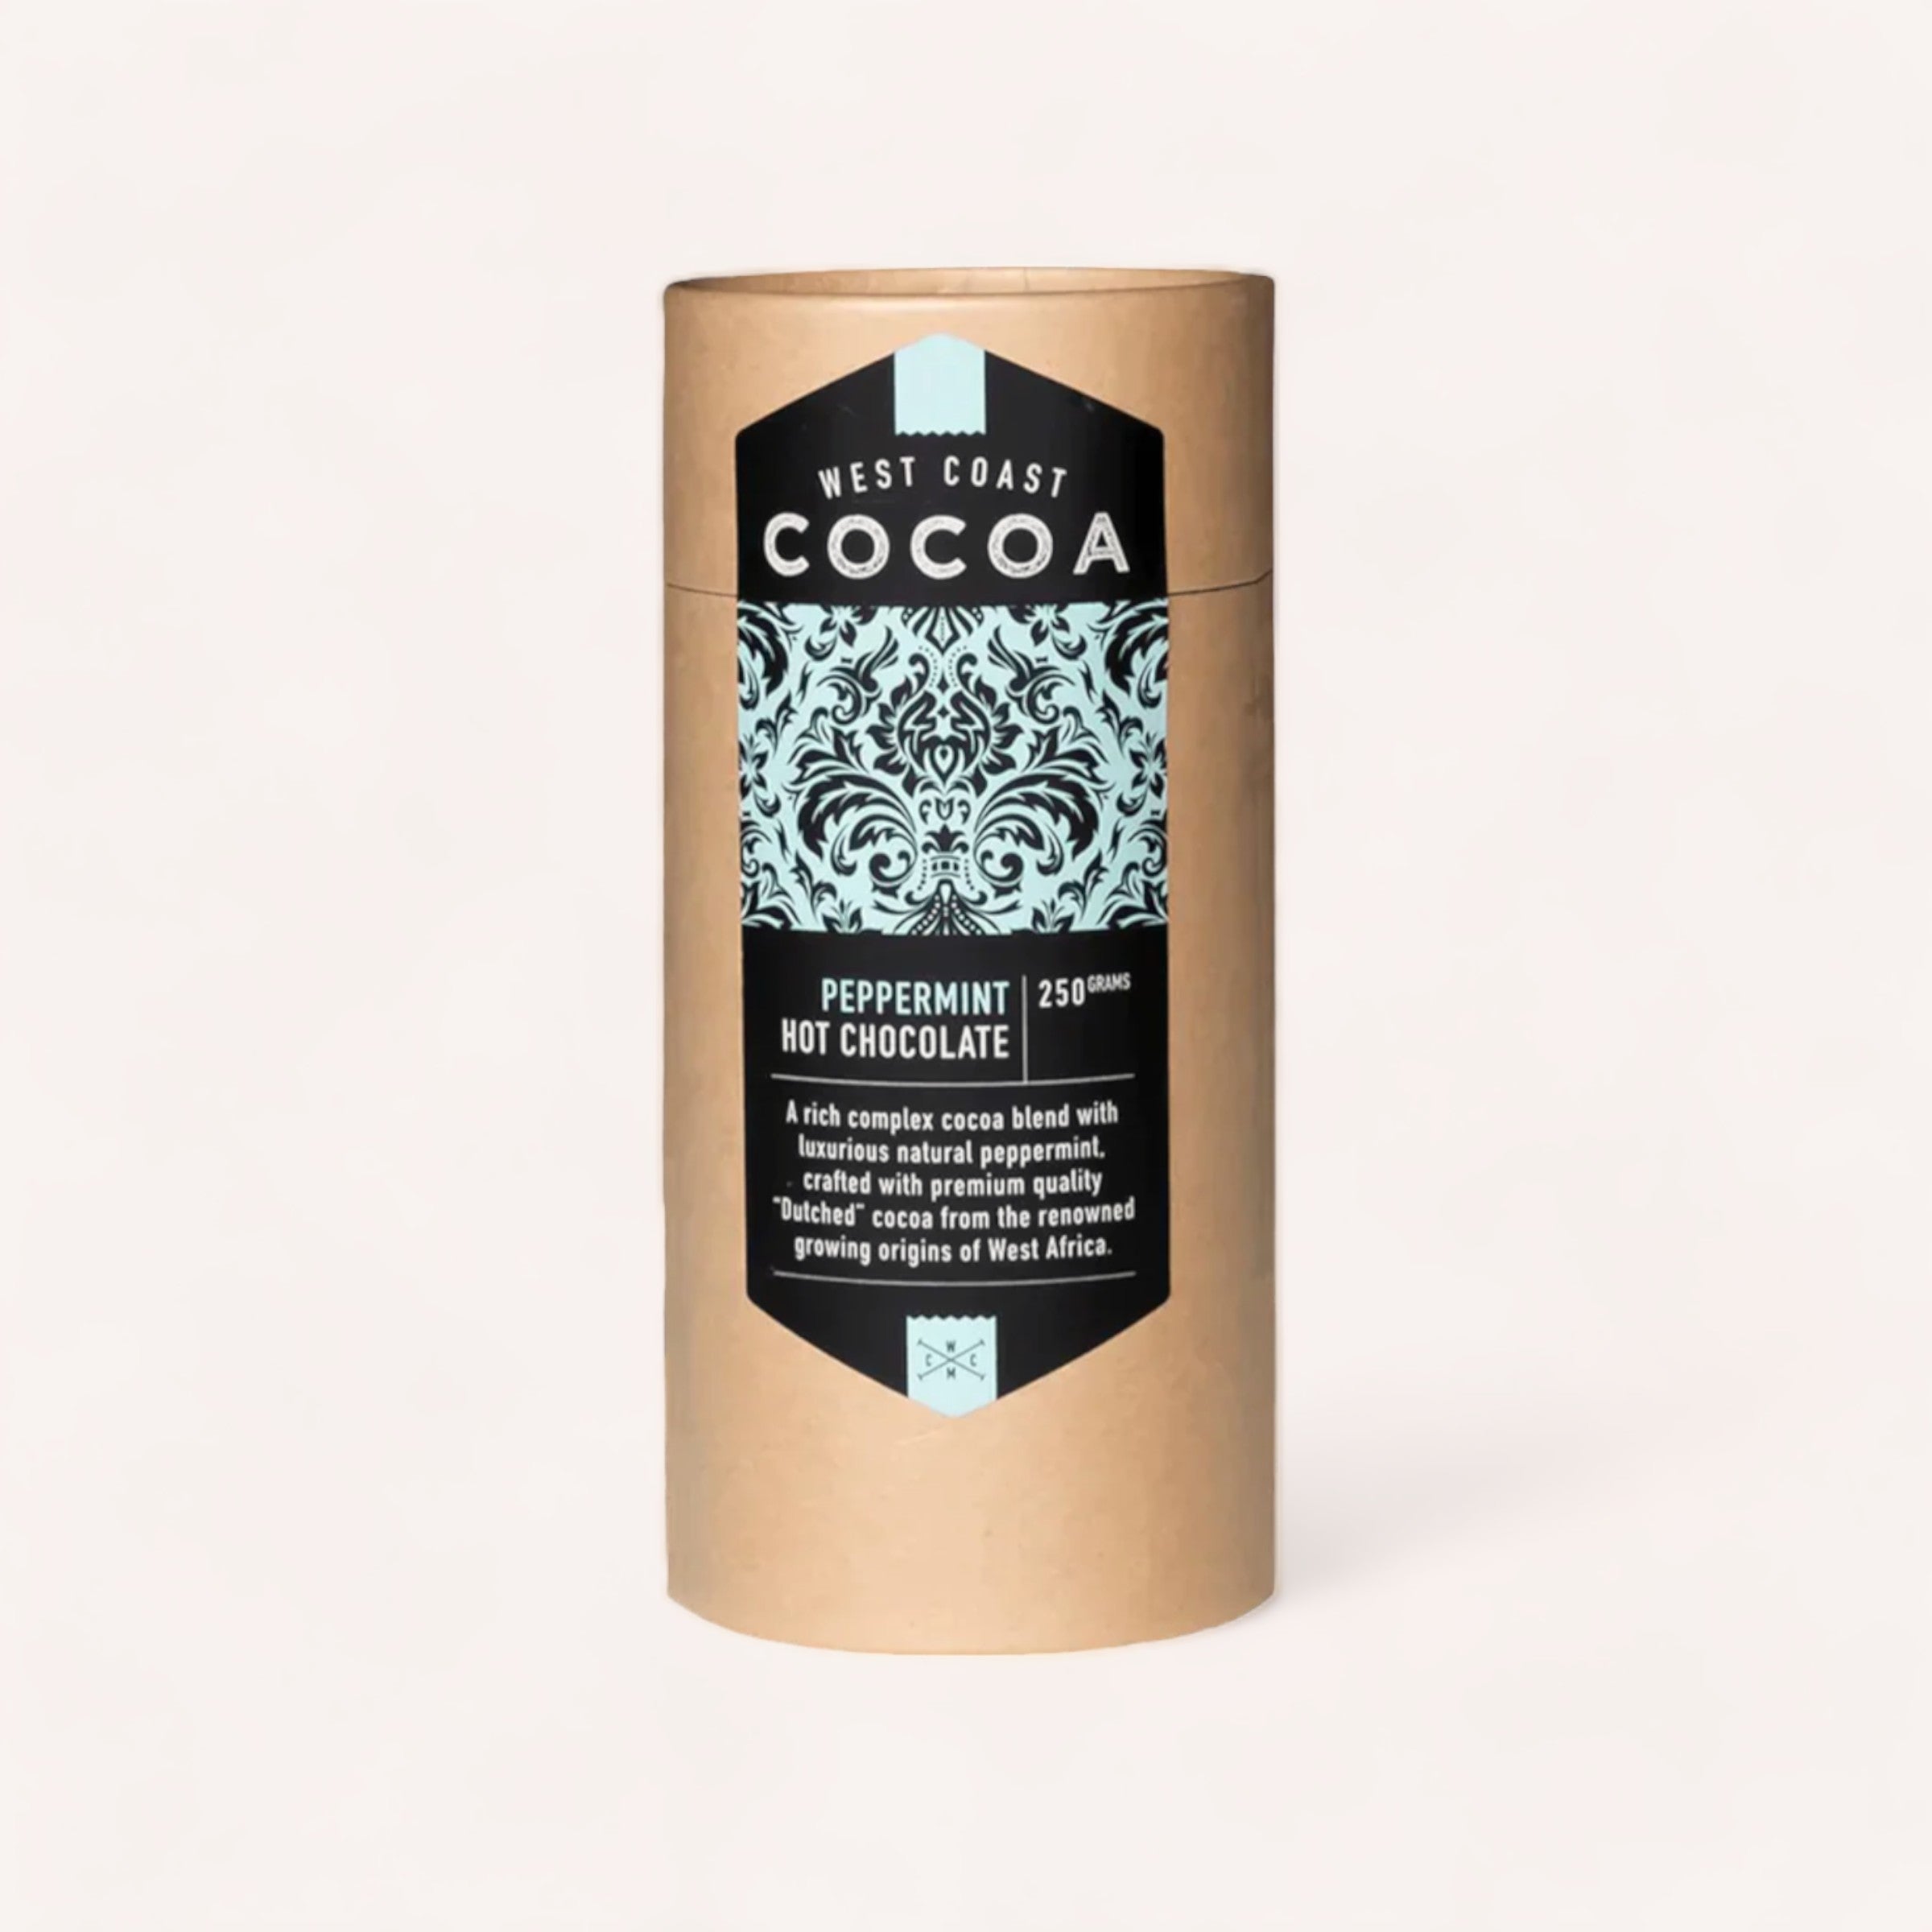 A cylindrical container of Peppermint Hot Chocolate 250g by West Coast Cocoa, featuring an intricate black and white label design and text that mentions its rich Dutched cocoa blend with a twist of peppermint, using.